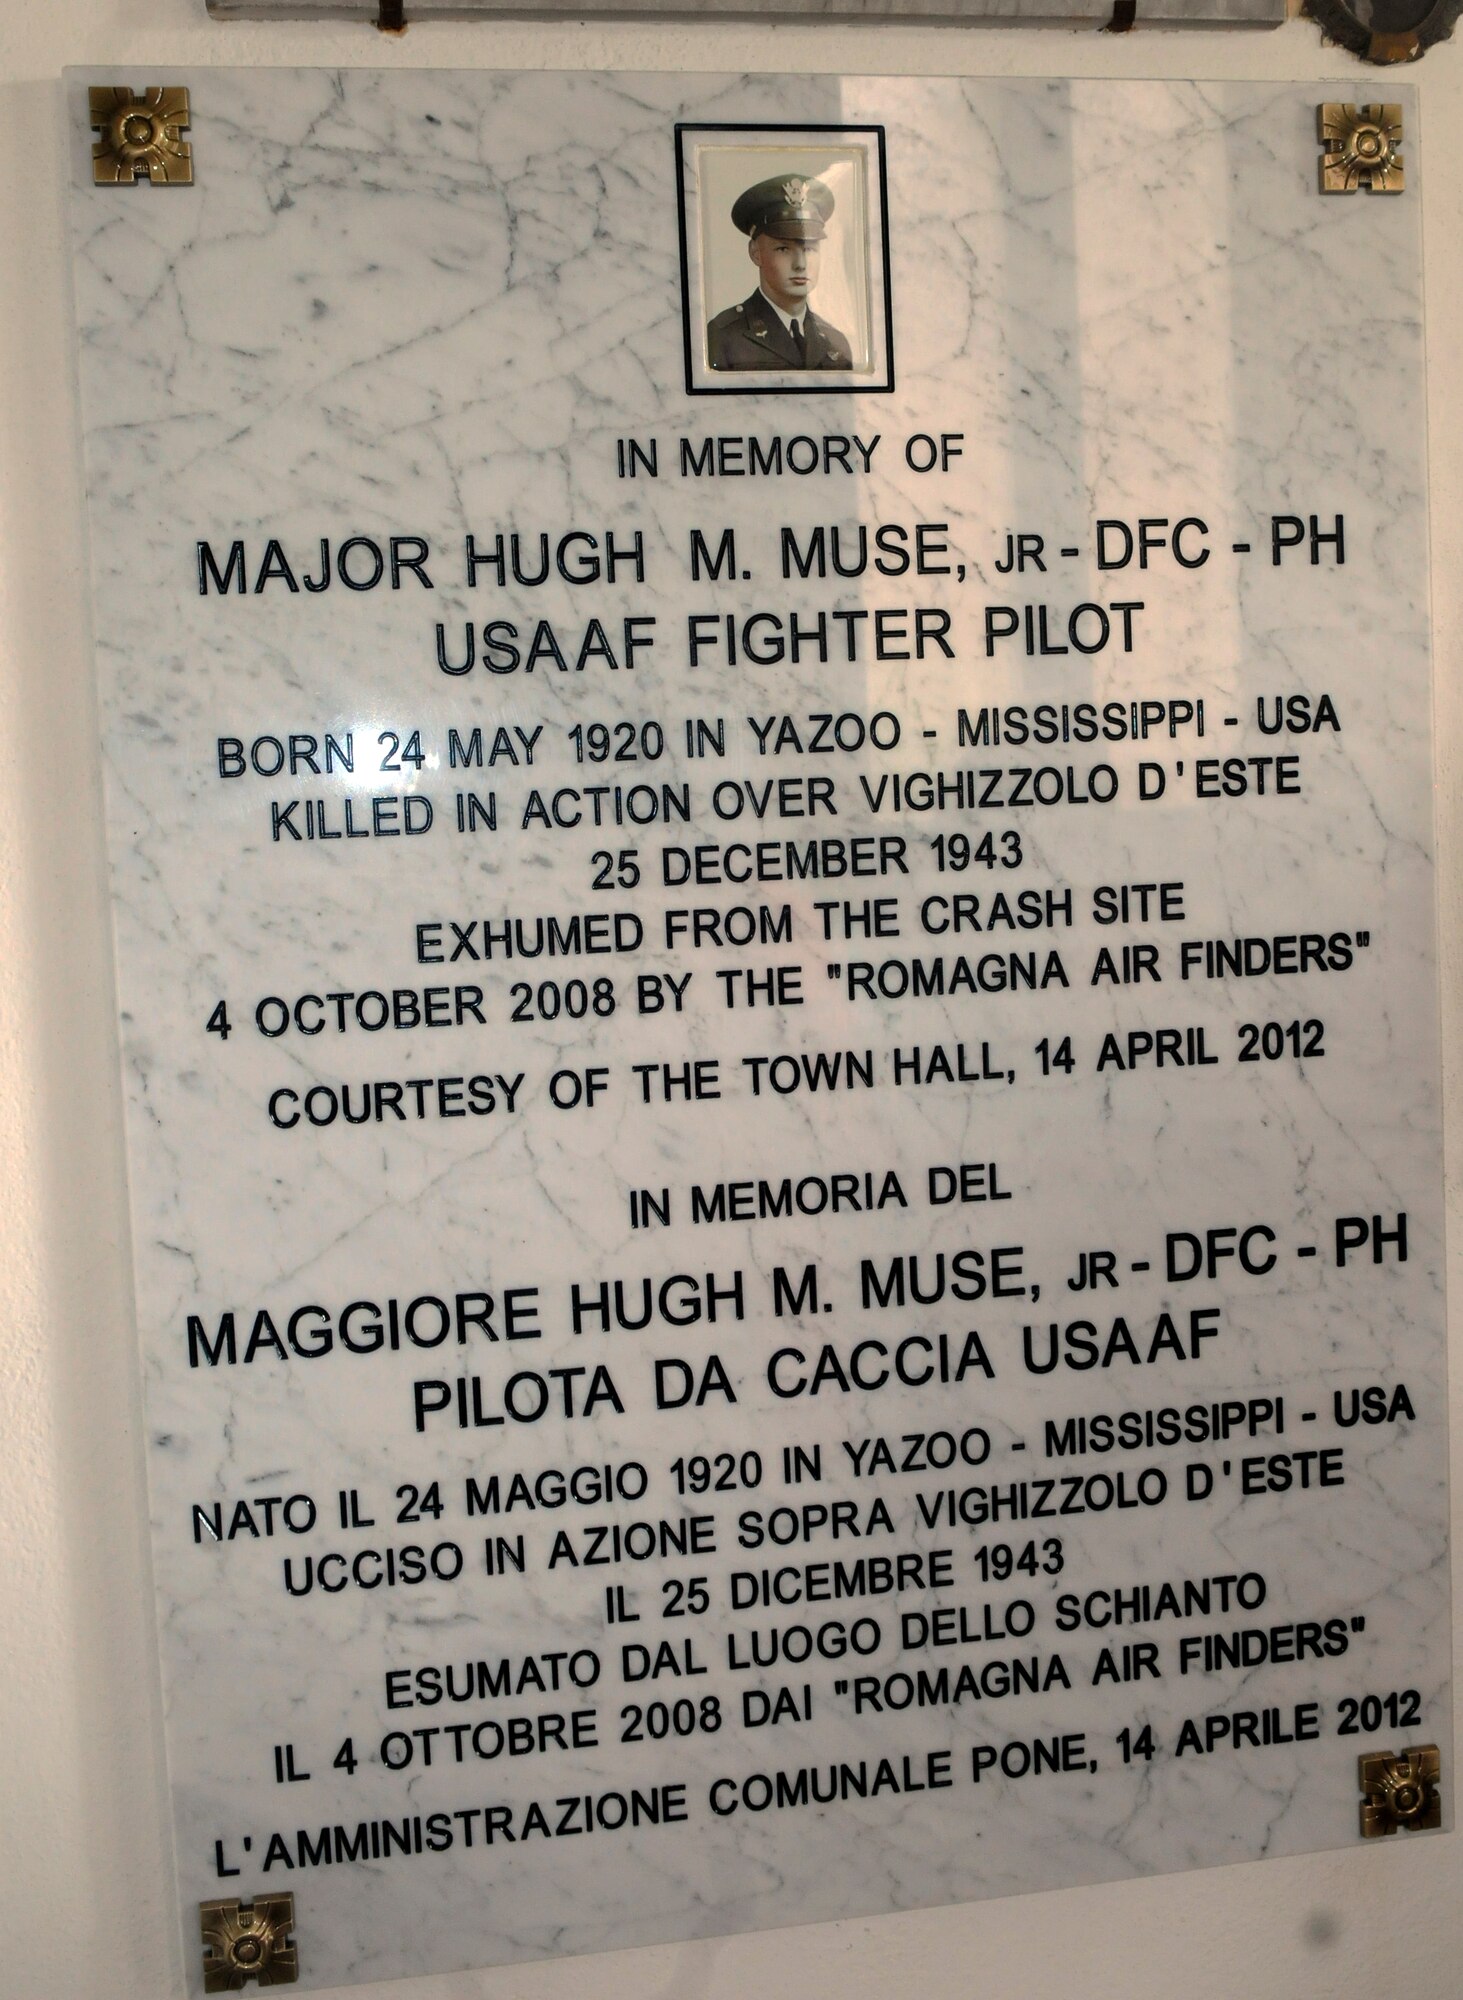 A plaque dedicated to Maj. Hugh Muse, Jr. is displayed during a remembrance ceremony April 14 in Vighizzolo D’Este, Italy.  Hugh was killed in action when his aircraft was shot down during a bombing mission on Dec. 25, 1943. (U.S Air Force photo/Airman 1st Class Briana Jones) 